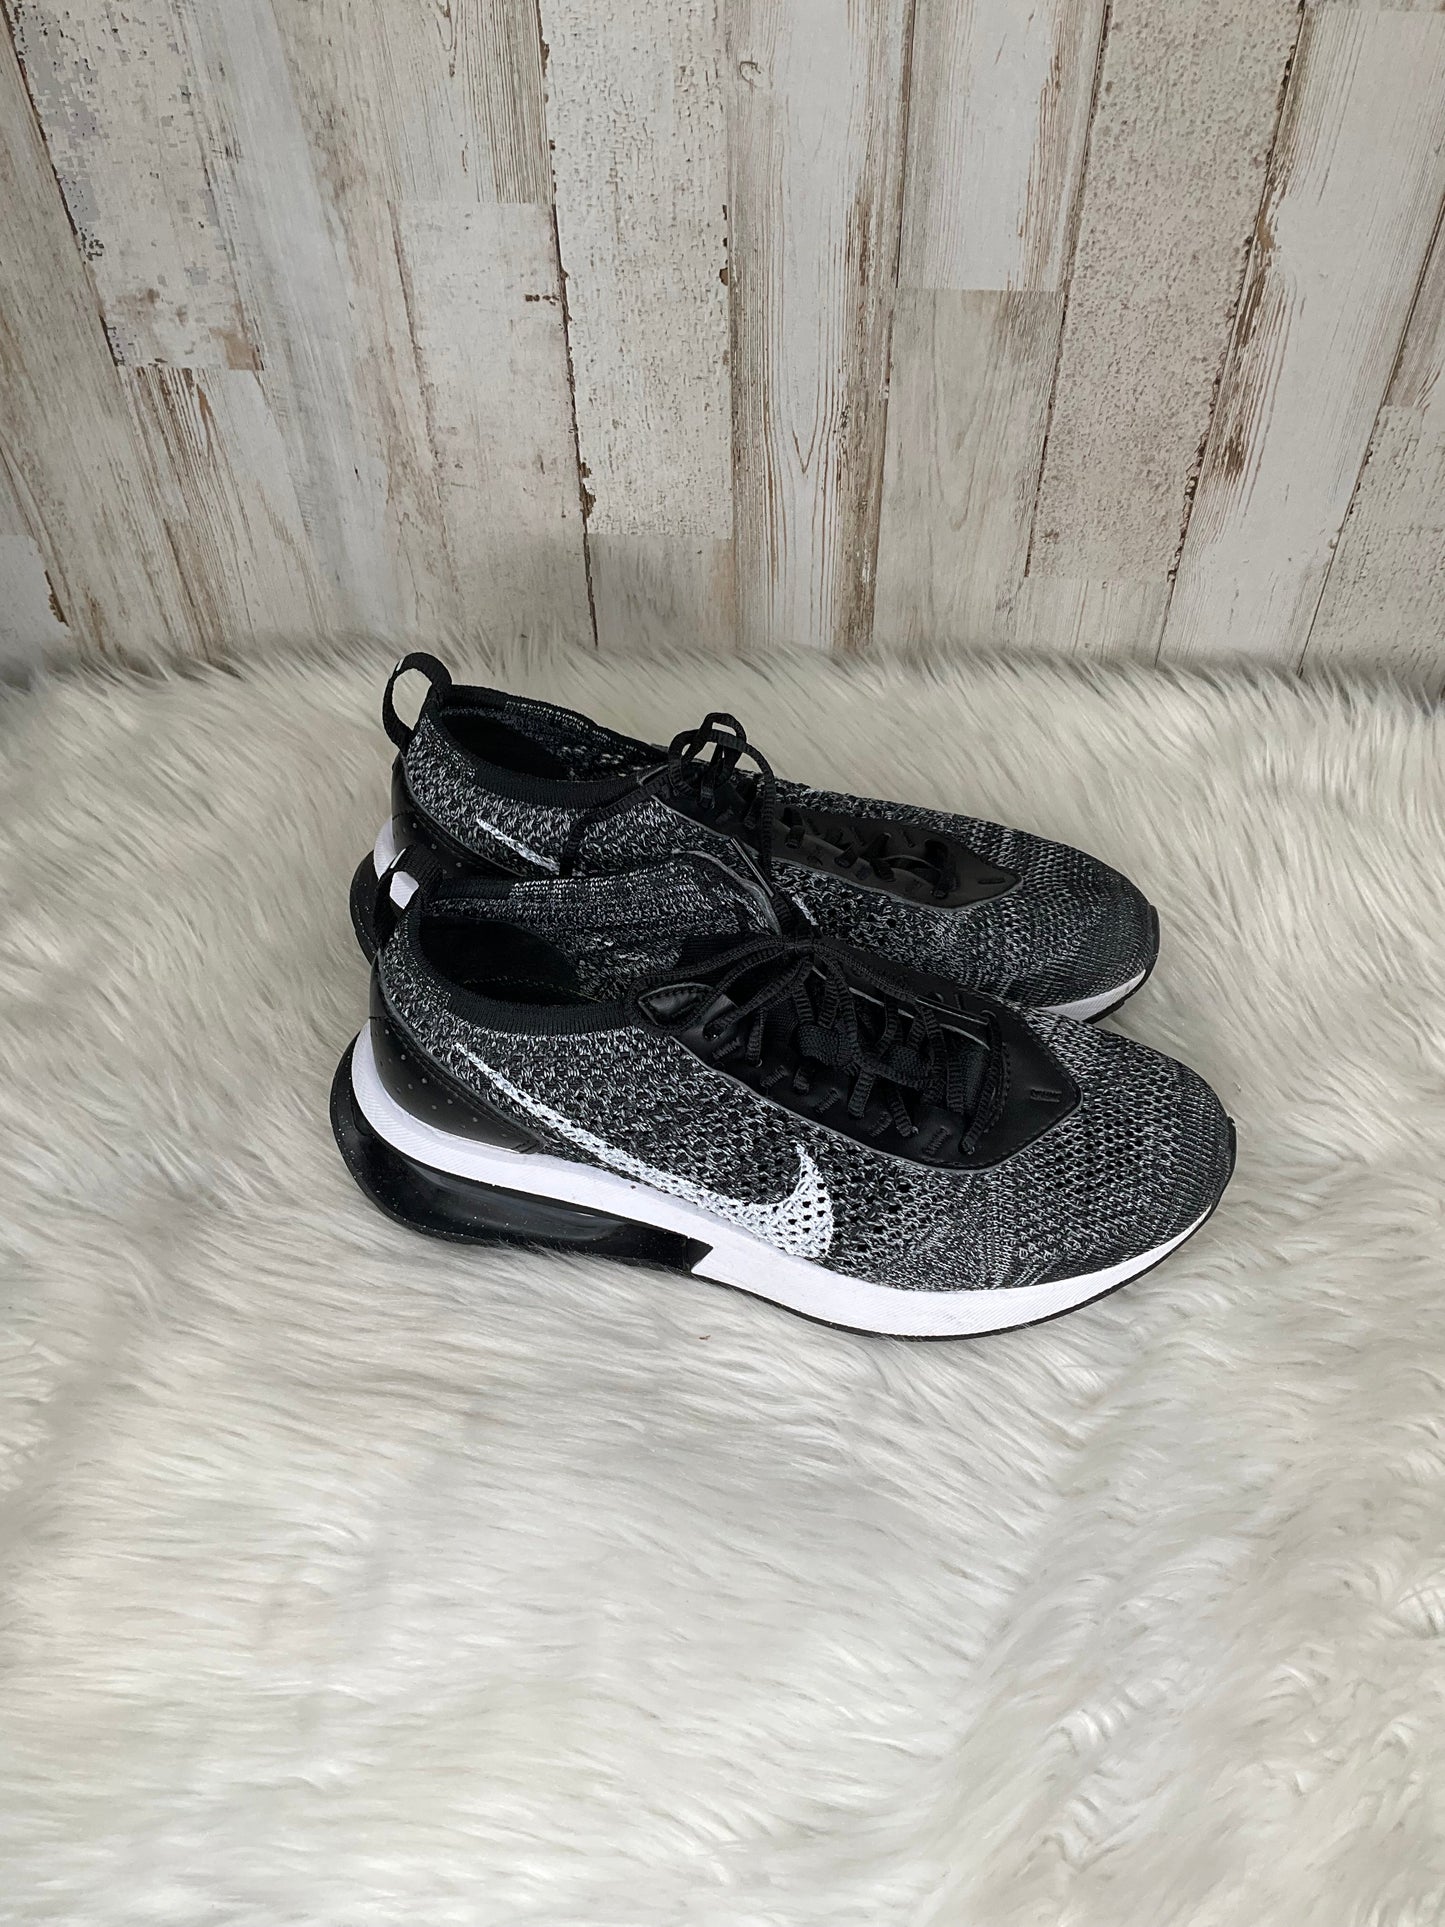 Shoes Athletic By Nike  Size: 6.5